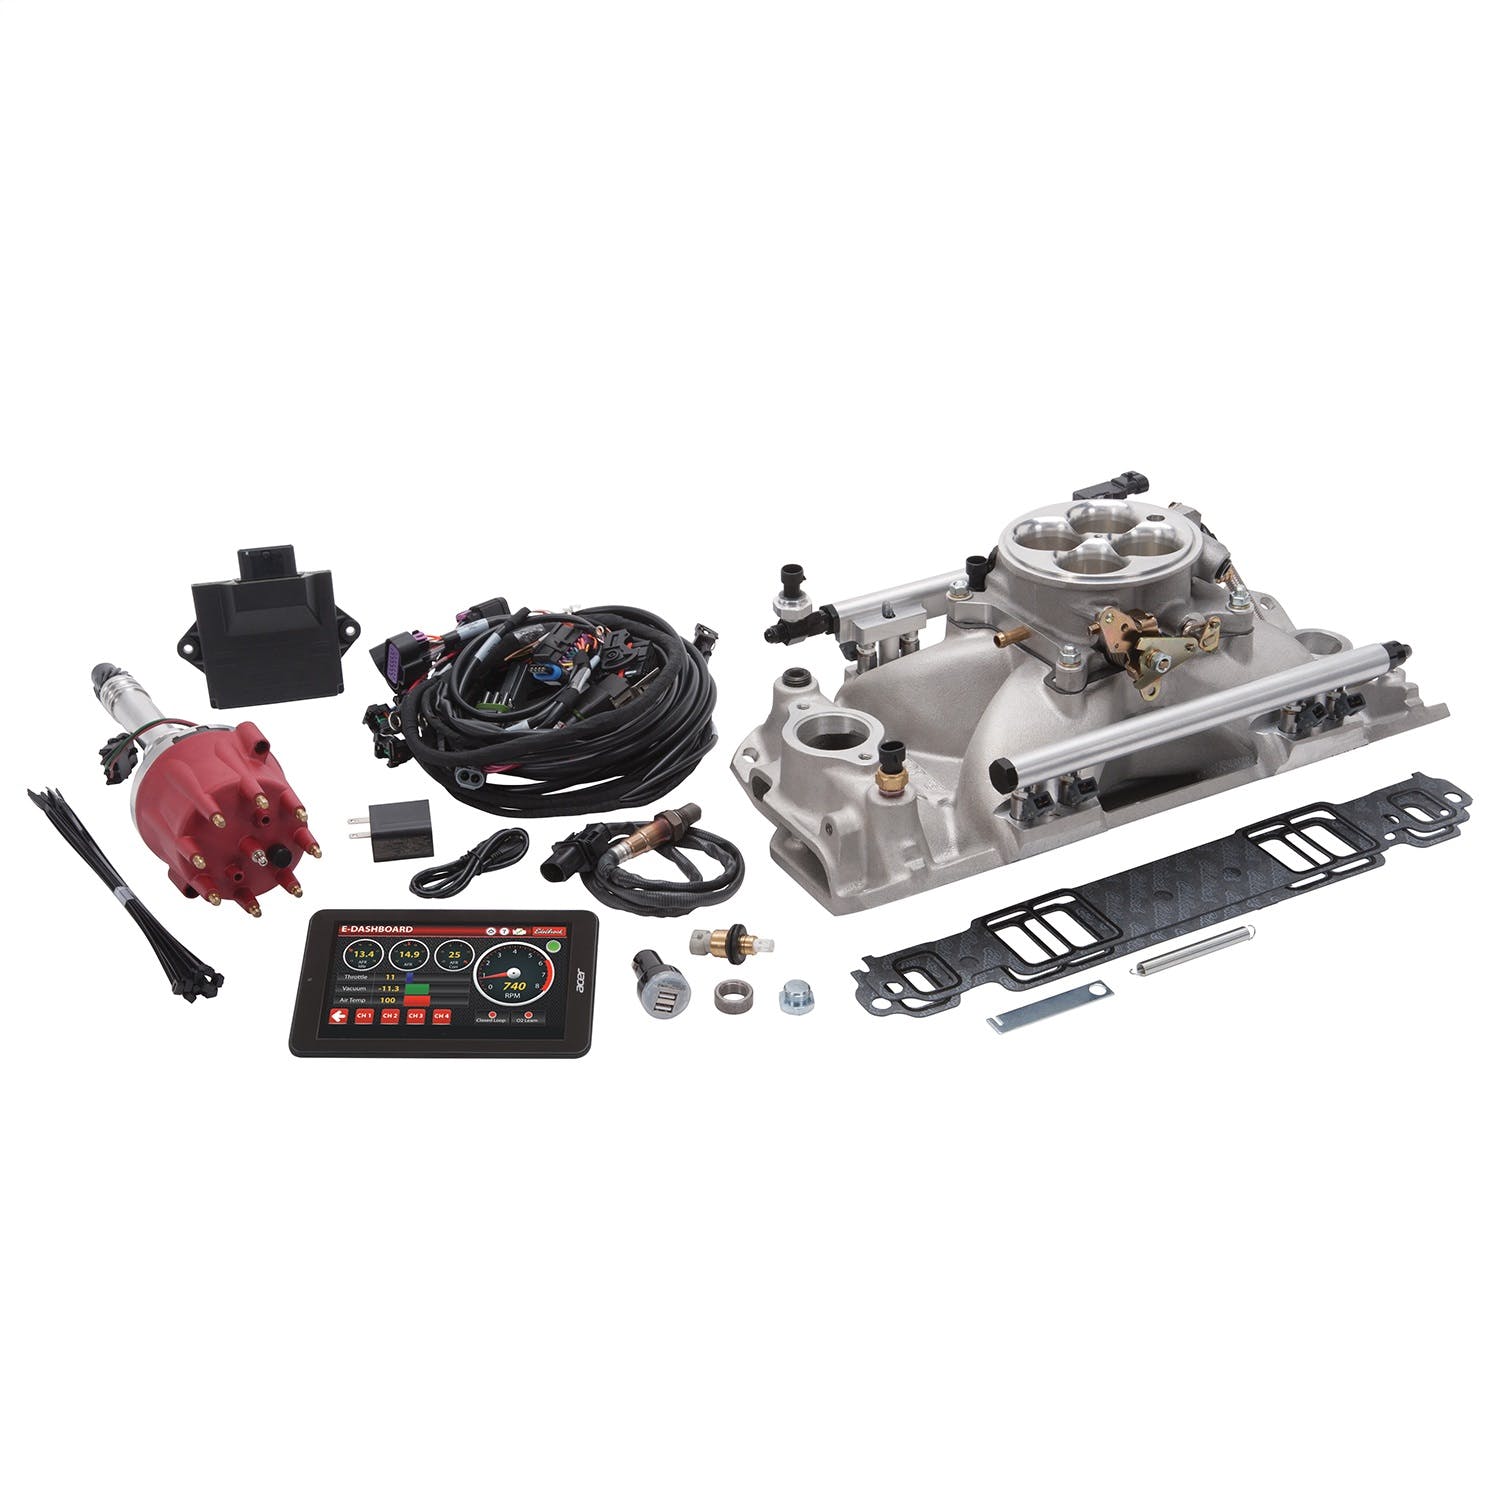 Edelbrock 35770 Pro-Flo 4 EFI System for 1986 and Earlier Small-Block Chevy Engines